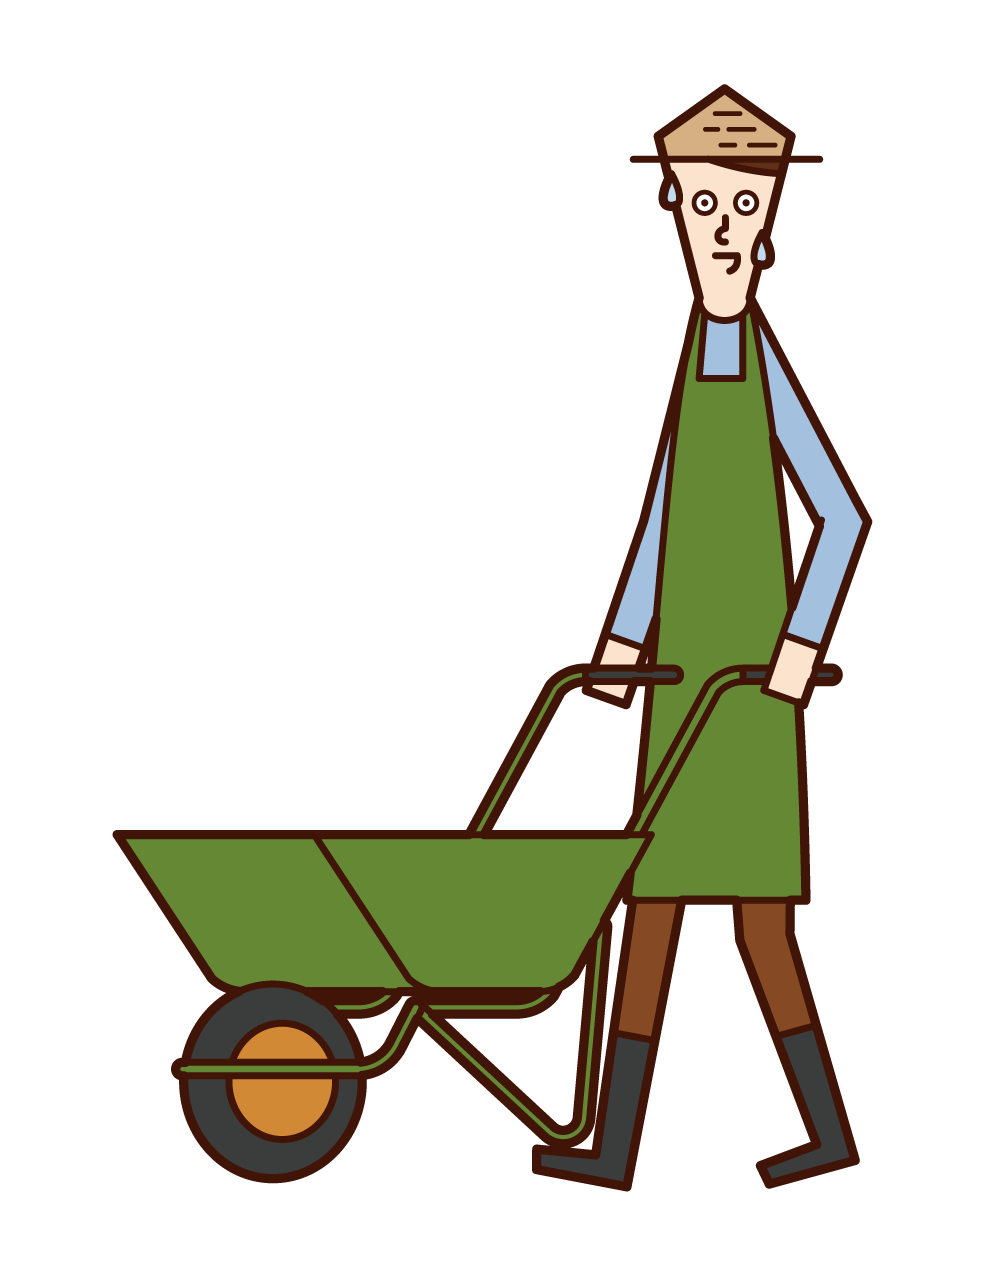 Illustration of a man using a wheeled unicycle